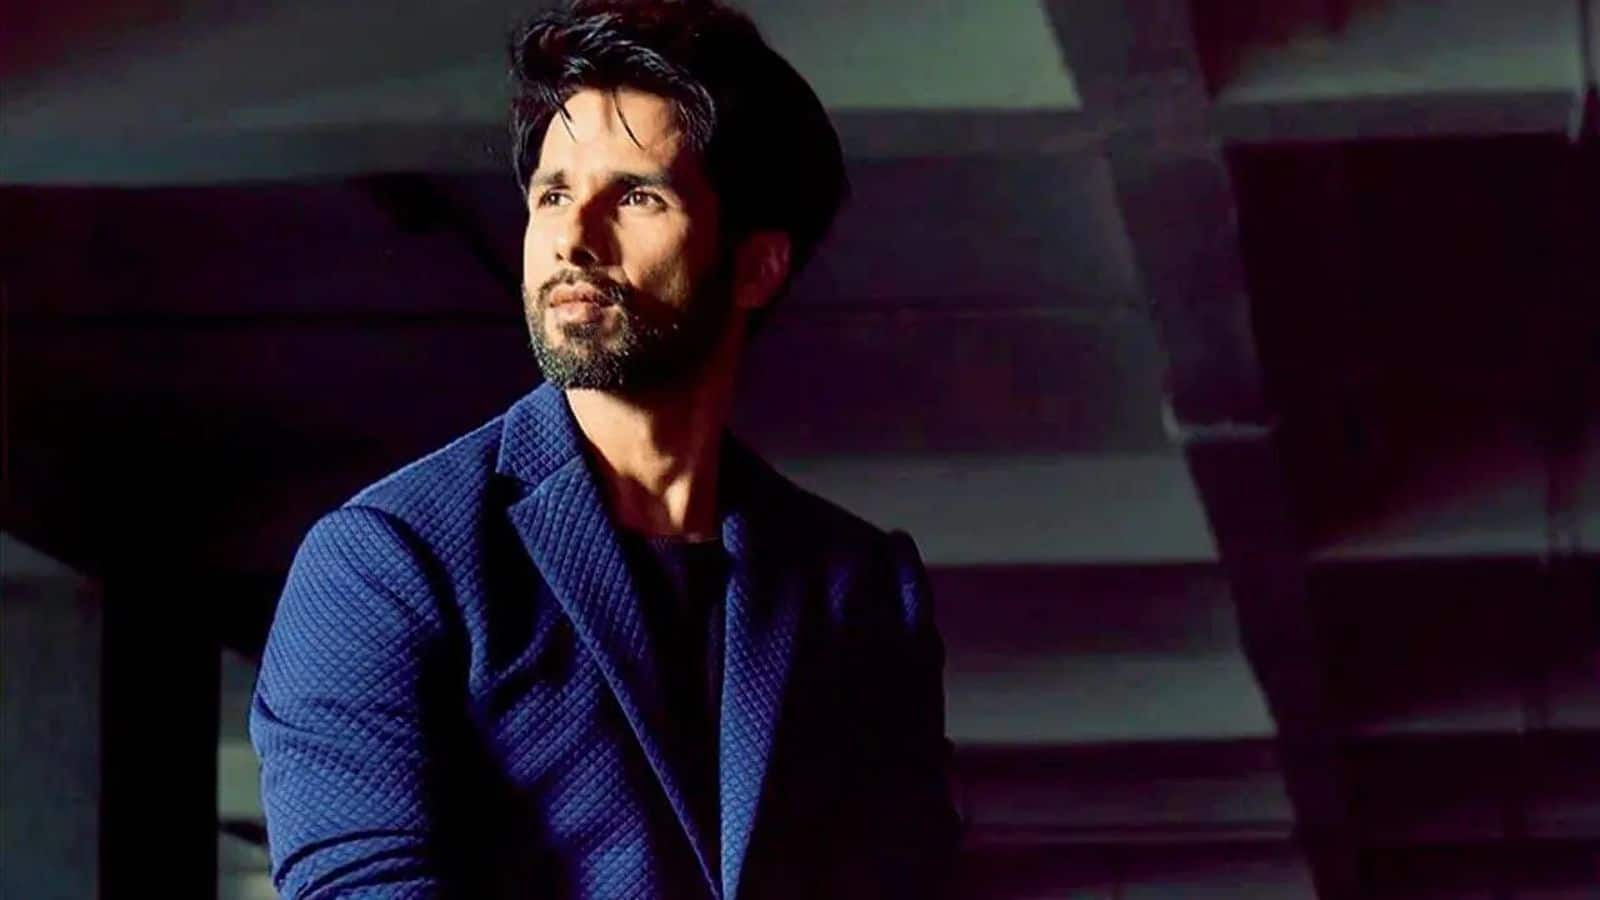 Shahid Kapoor is studying ancient texts for 'Ashwatthama': Report